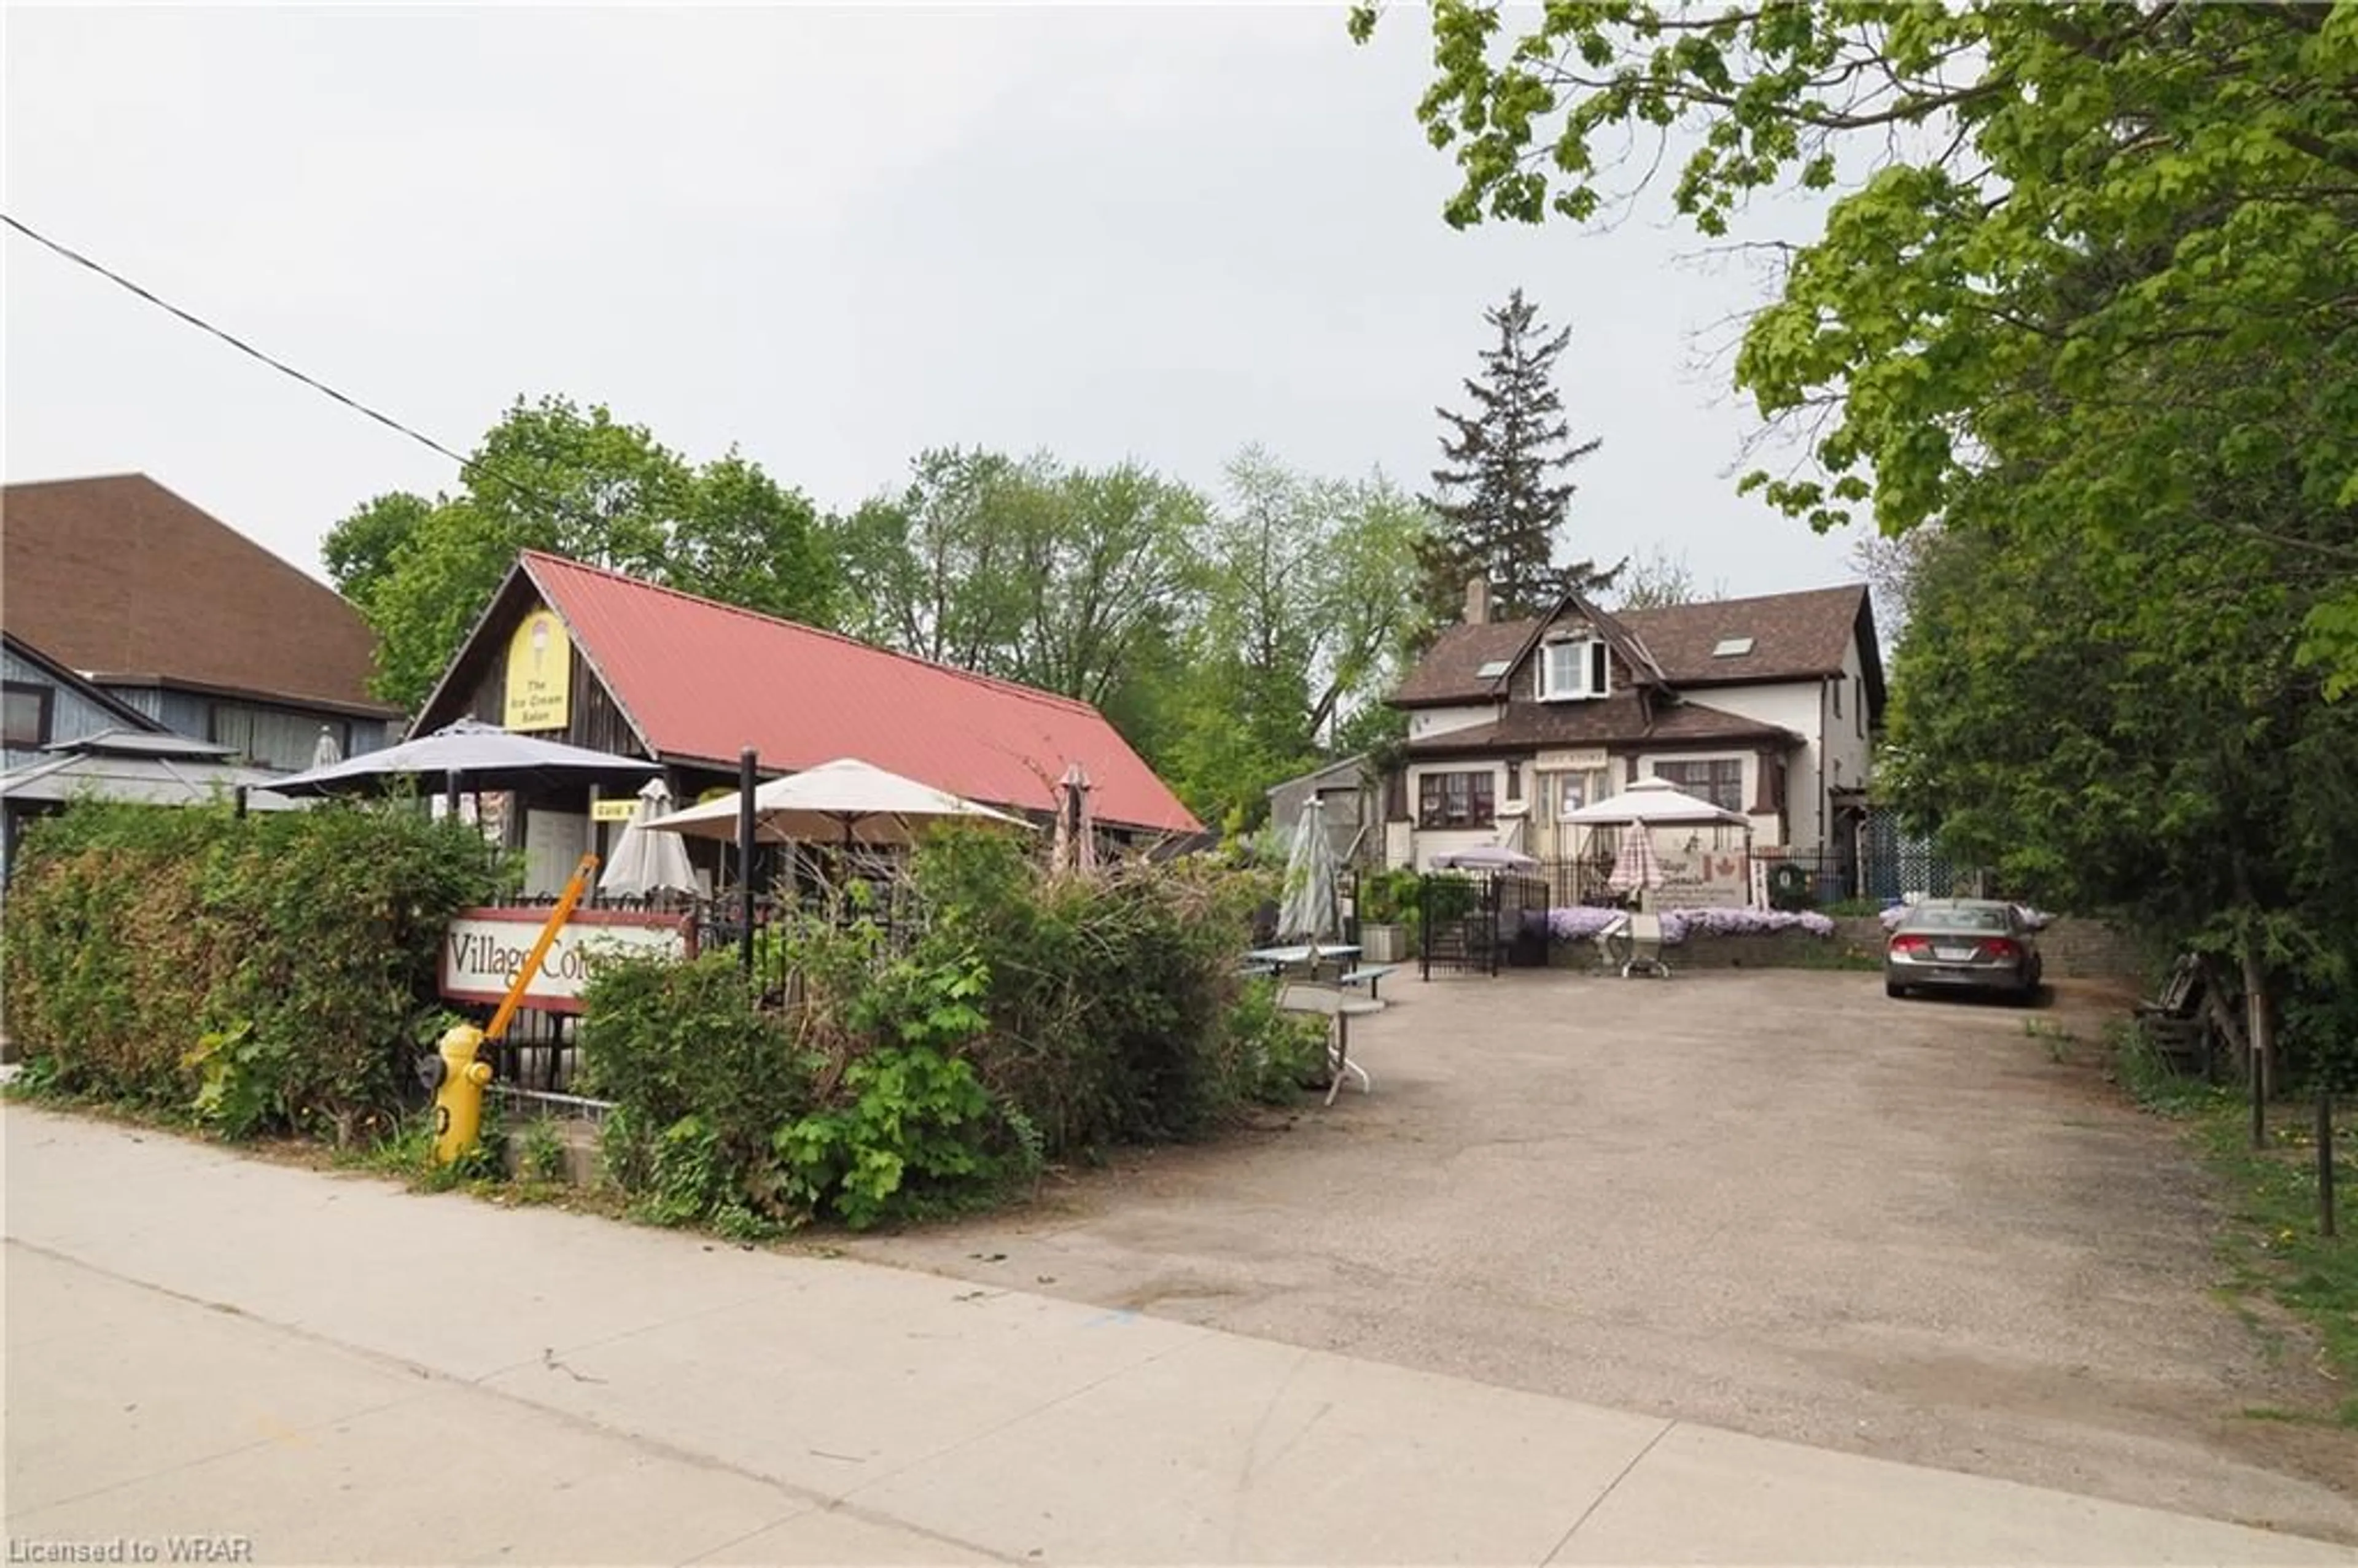 Street view for 1377 King St, St. Jacobs Ontario N0B 2N0